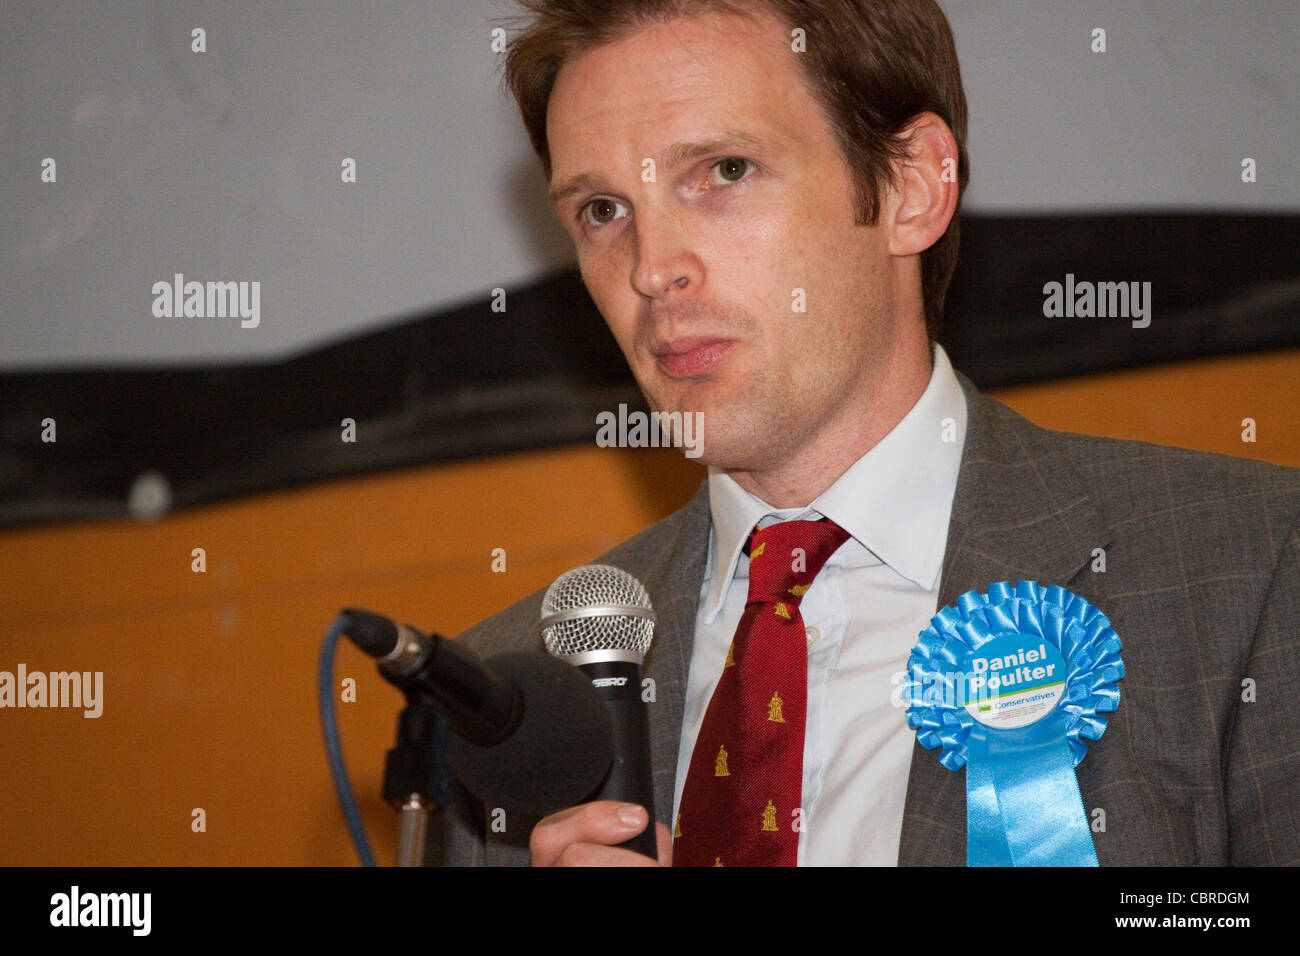 Dr Dan Poulter Tory candidate at the 2010 general election return for Central Suffolk and North Ipswich in a Stowmarket sports and leisure centre. Stock Photo